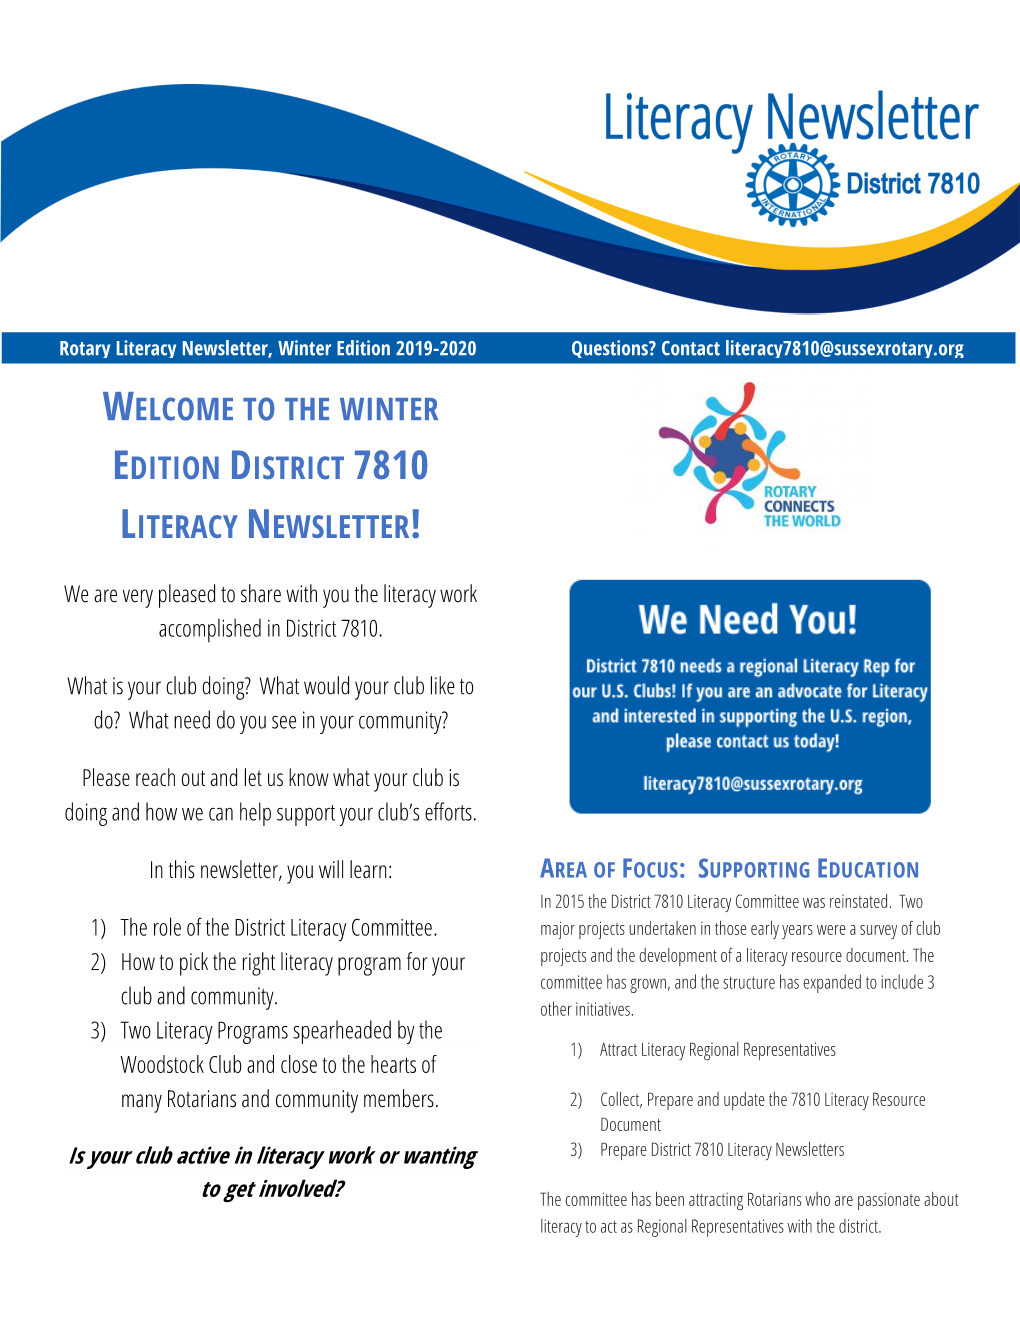 Welcome to the Winter Edition District 7810 Literacy Newsletter!